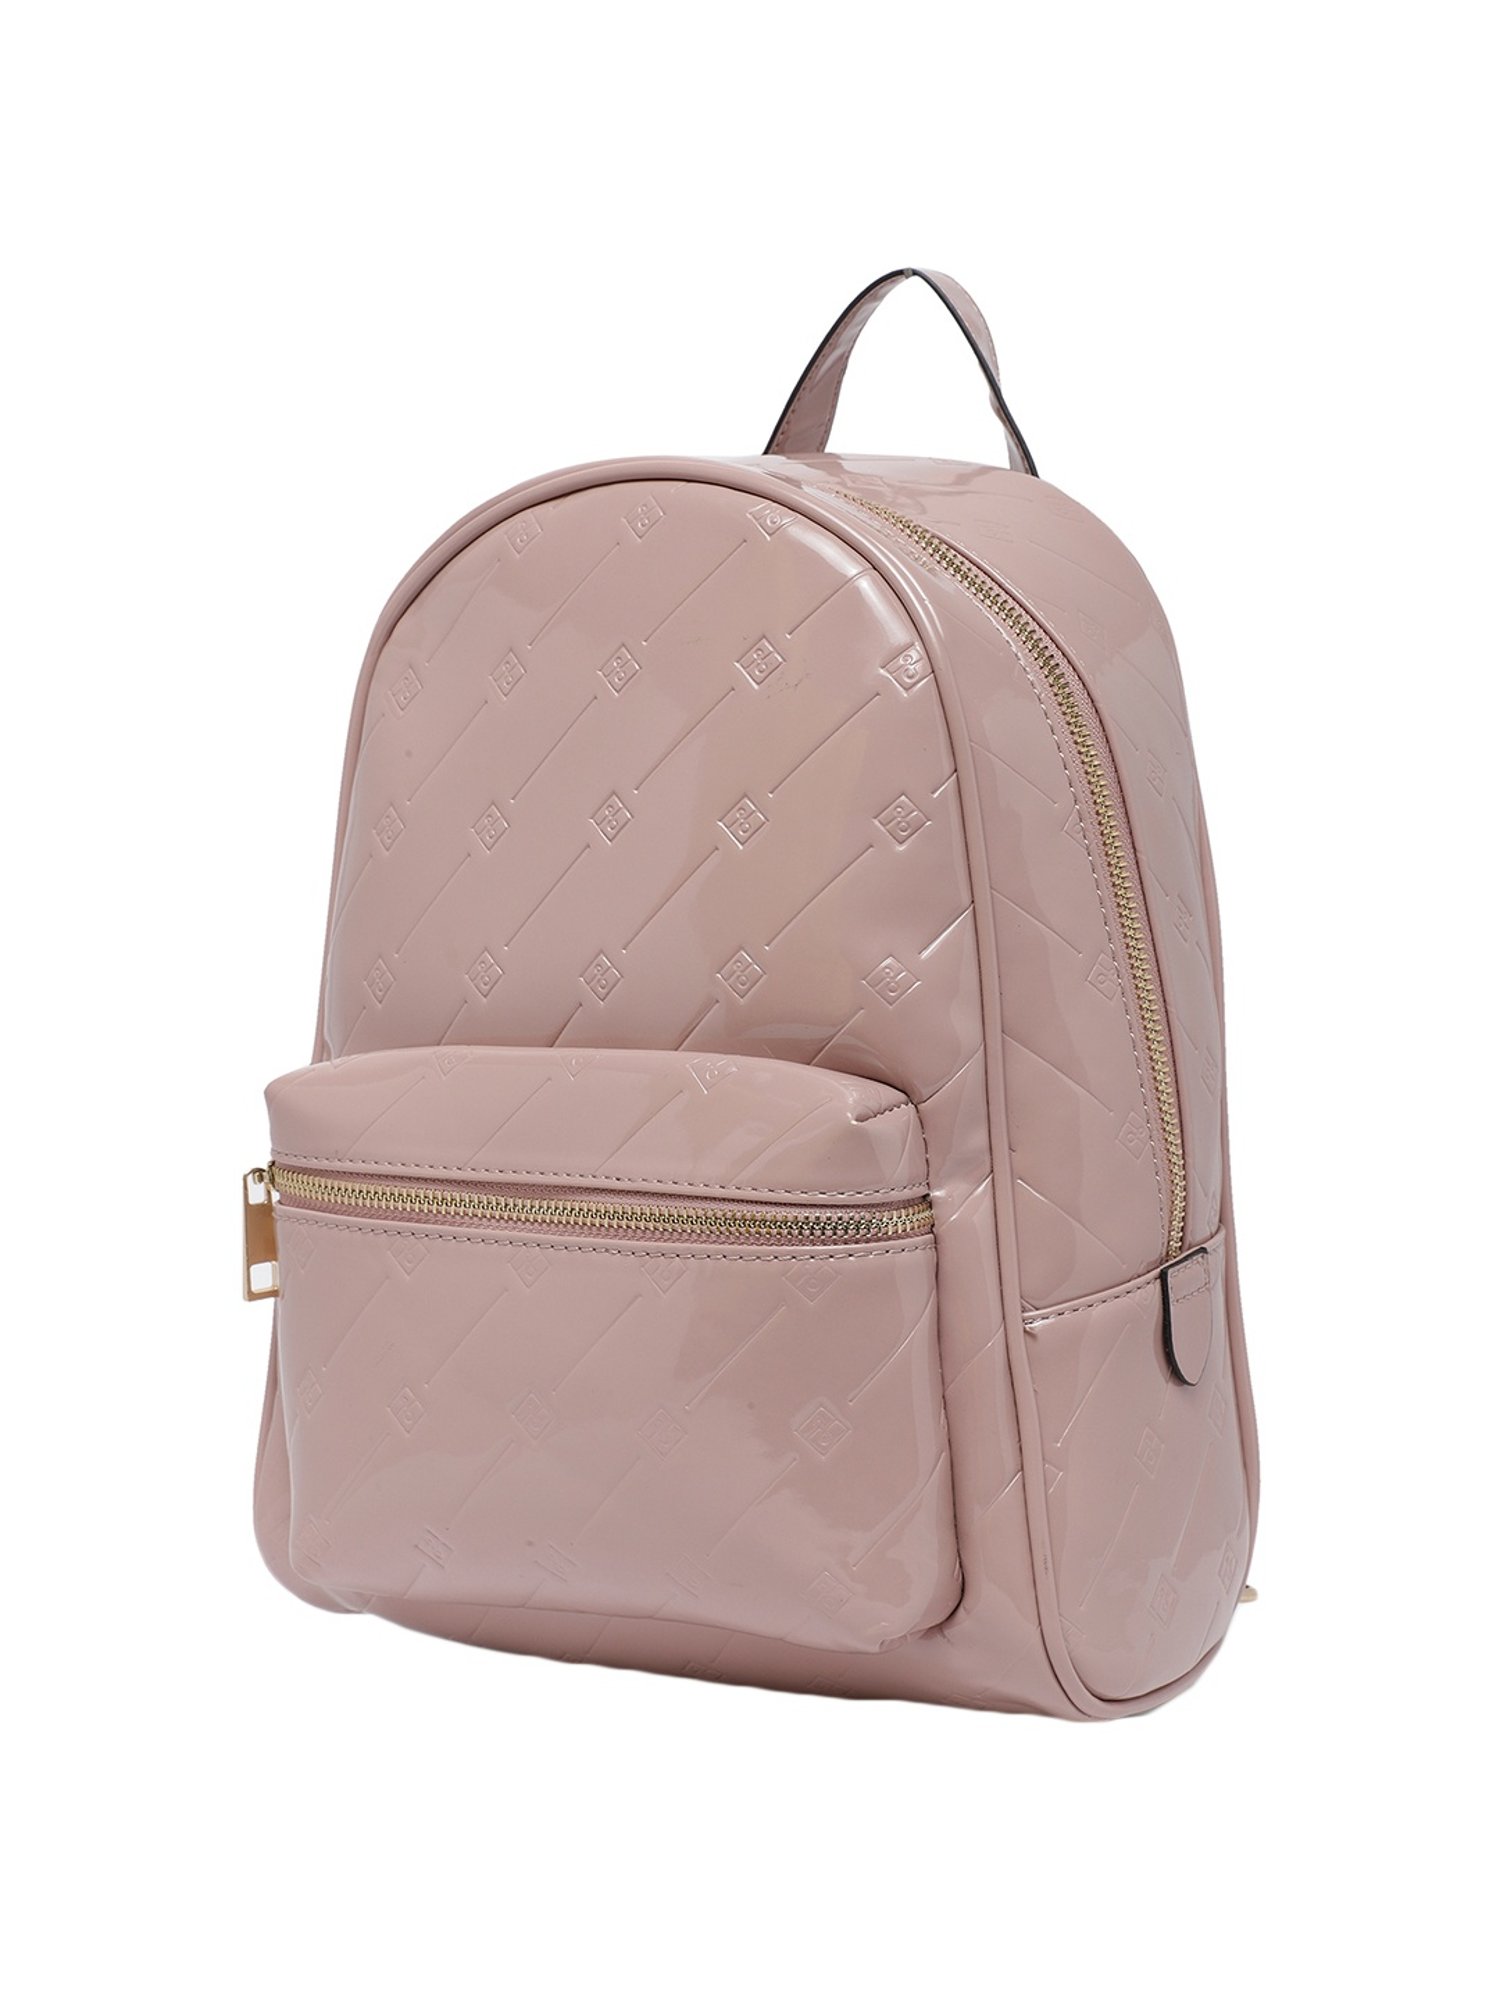 Call It Spring, Bags, Call It Spring Backpack